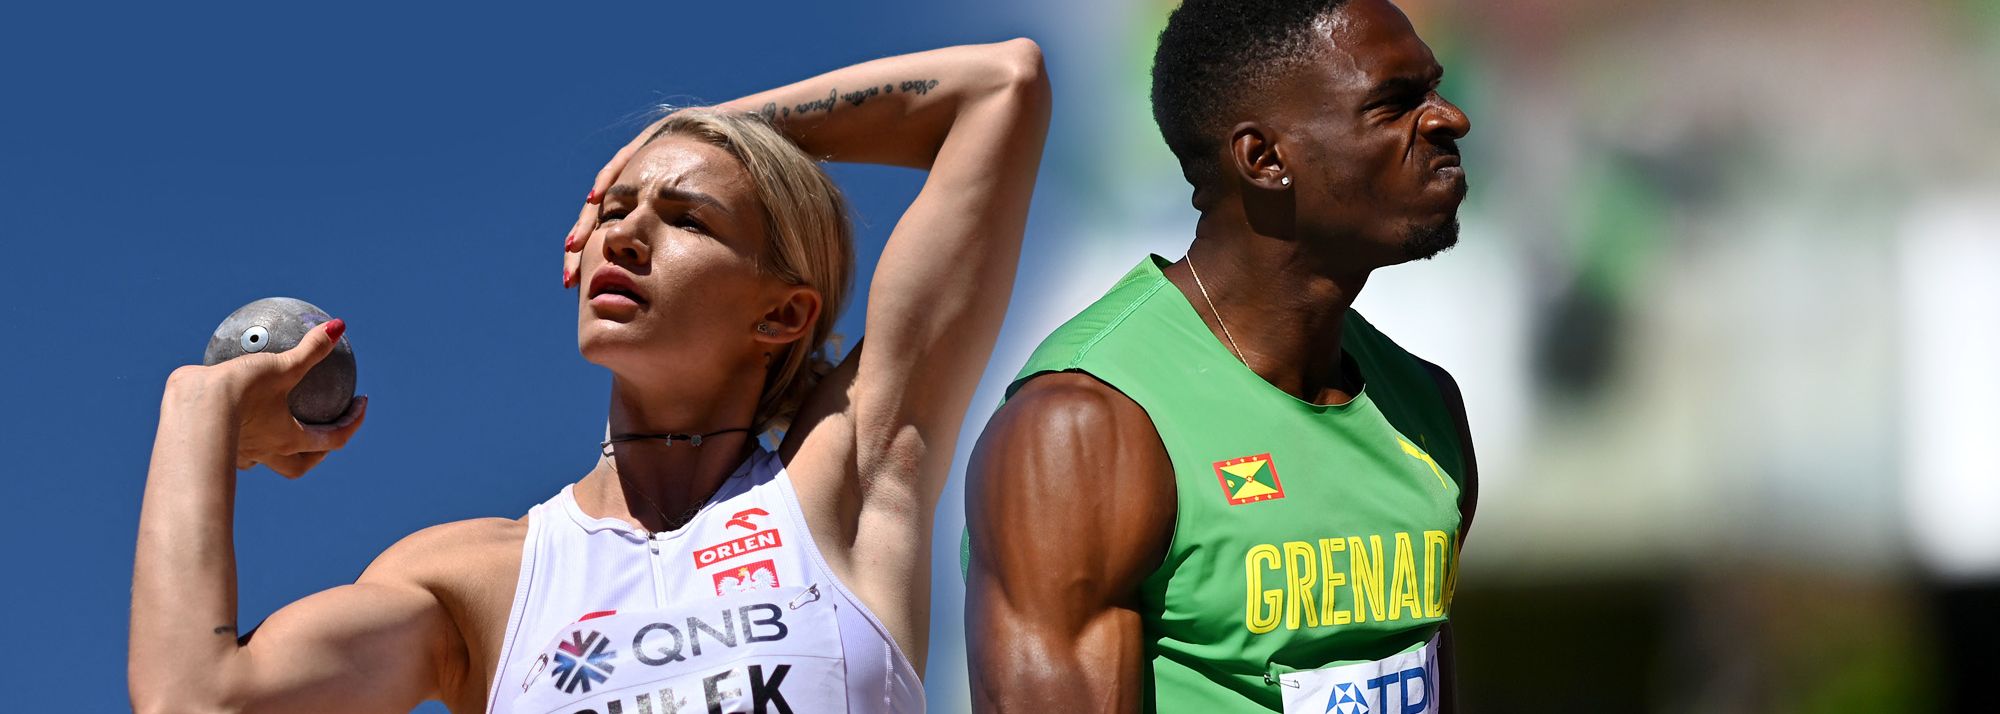 World indoor silver medallist Adrianna Sulek and Commonwealth champion Lindon Victor top the end-of-season standings